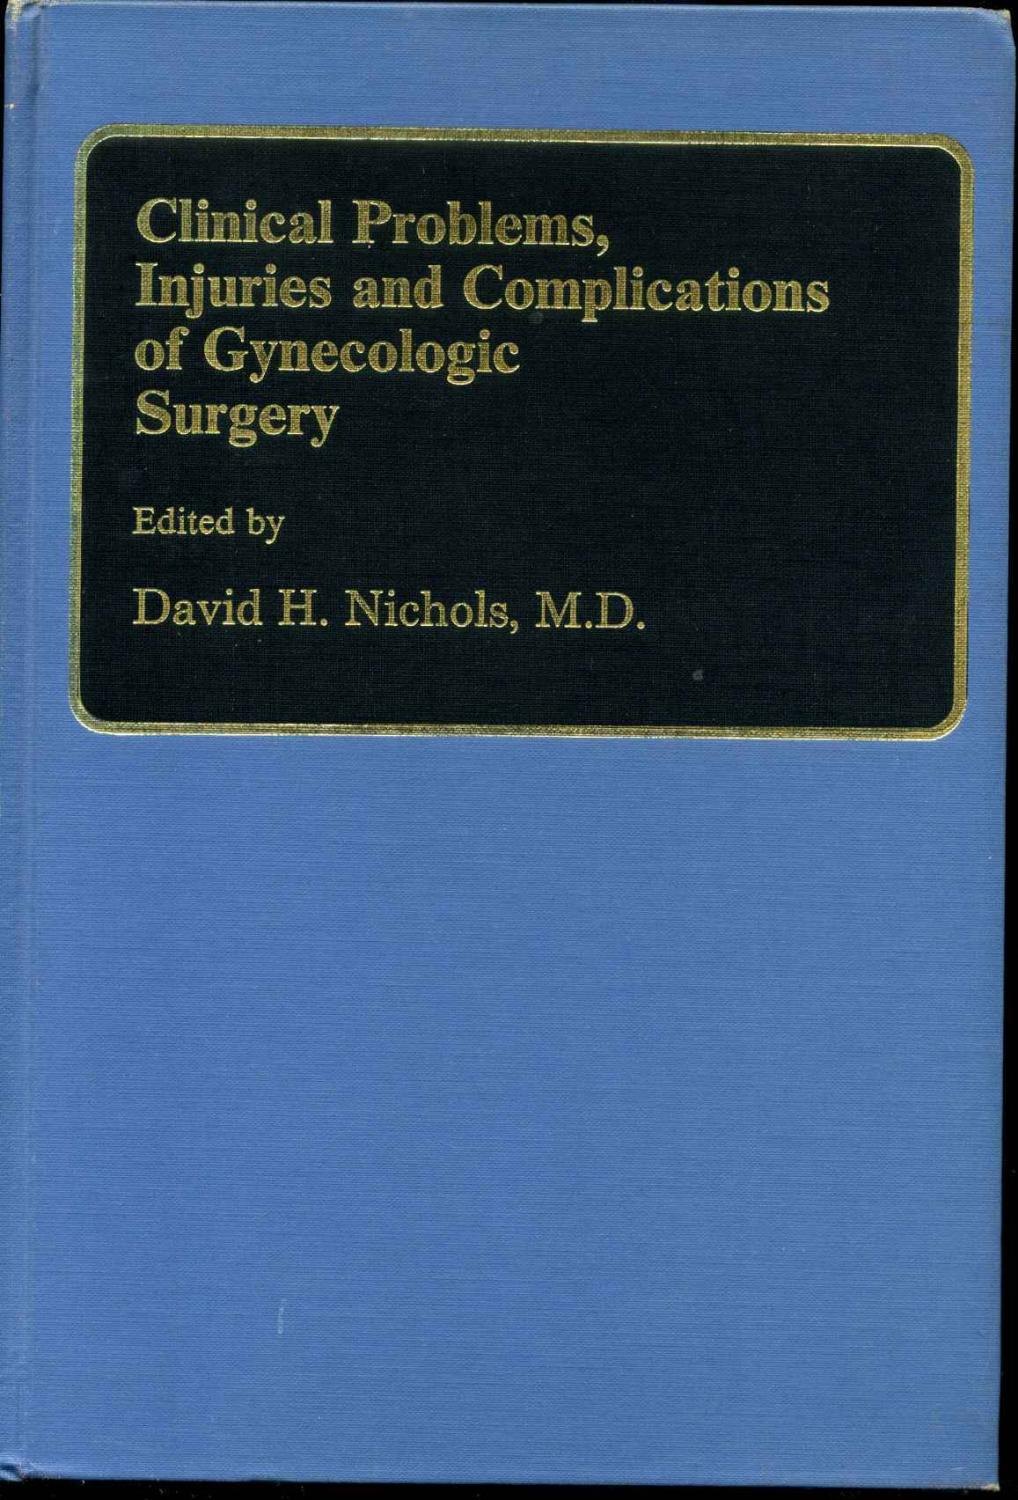 Clinical Problems, Injuries, and Complications of Gynecologic Surgery. - Nichols, David H.; Anderson, George W.